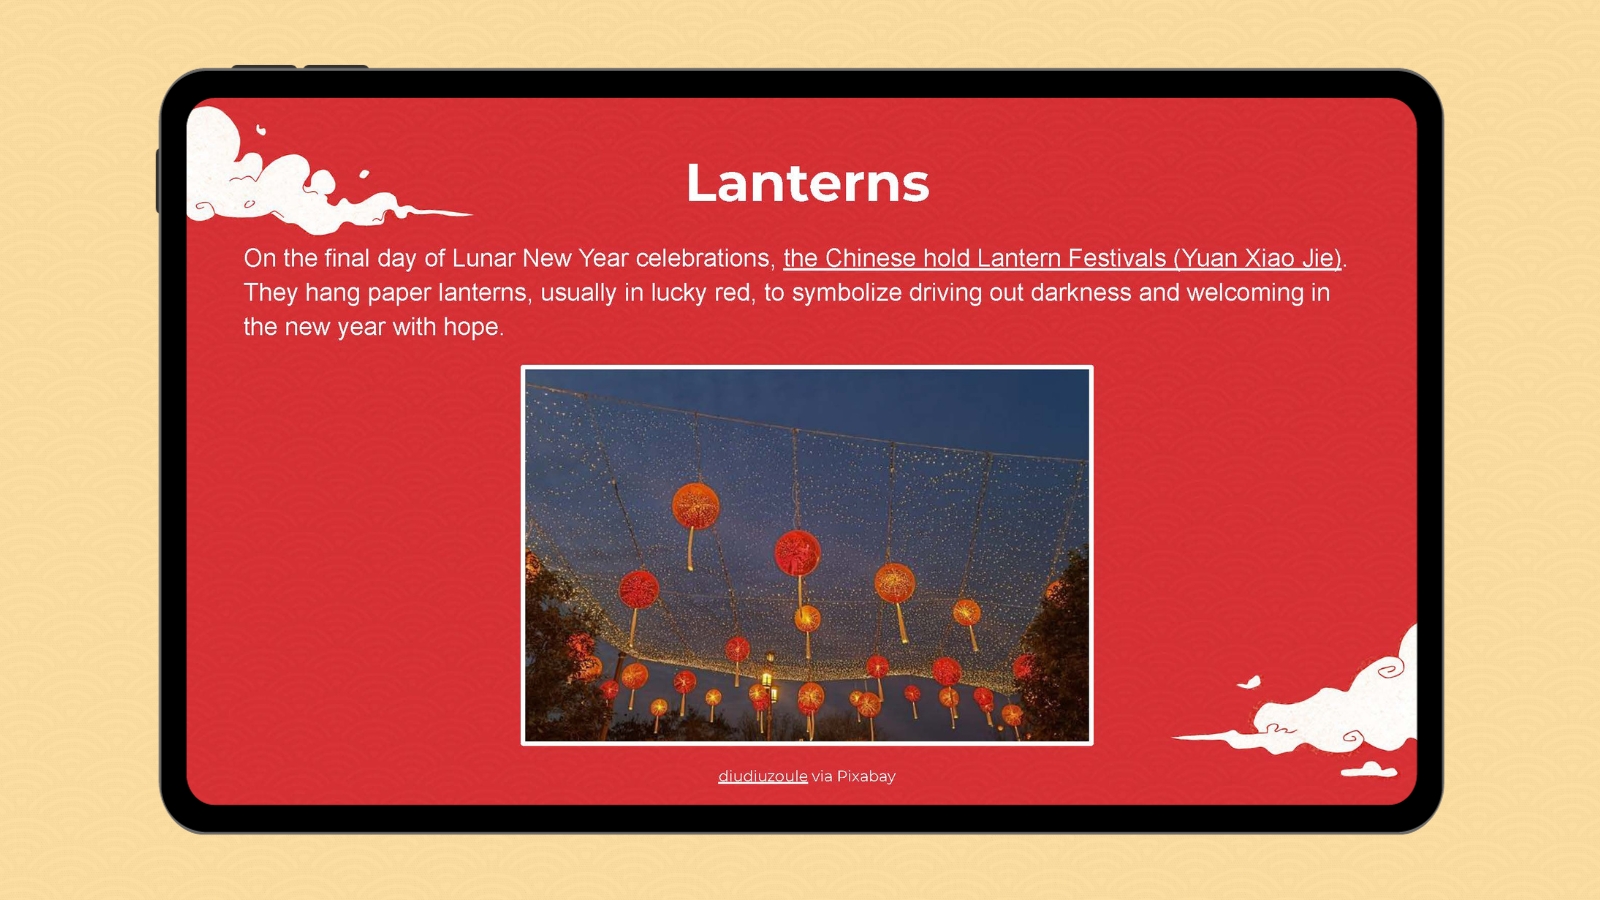 Google slide with image and information about the Lunar New Year lanterns tradition